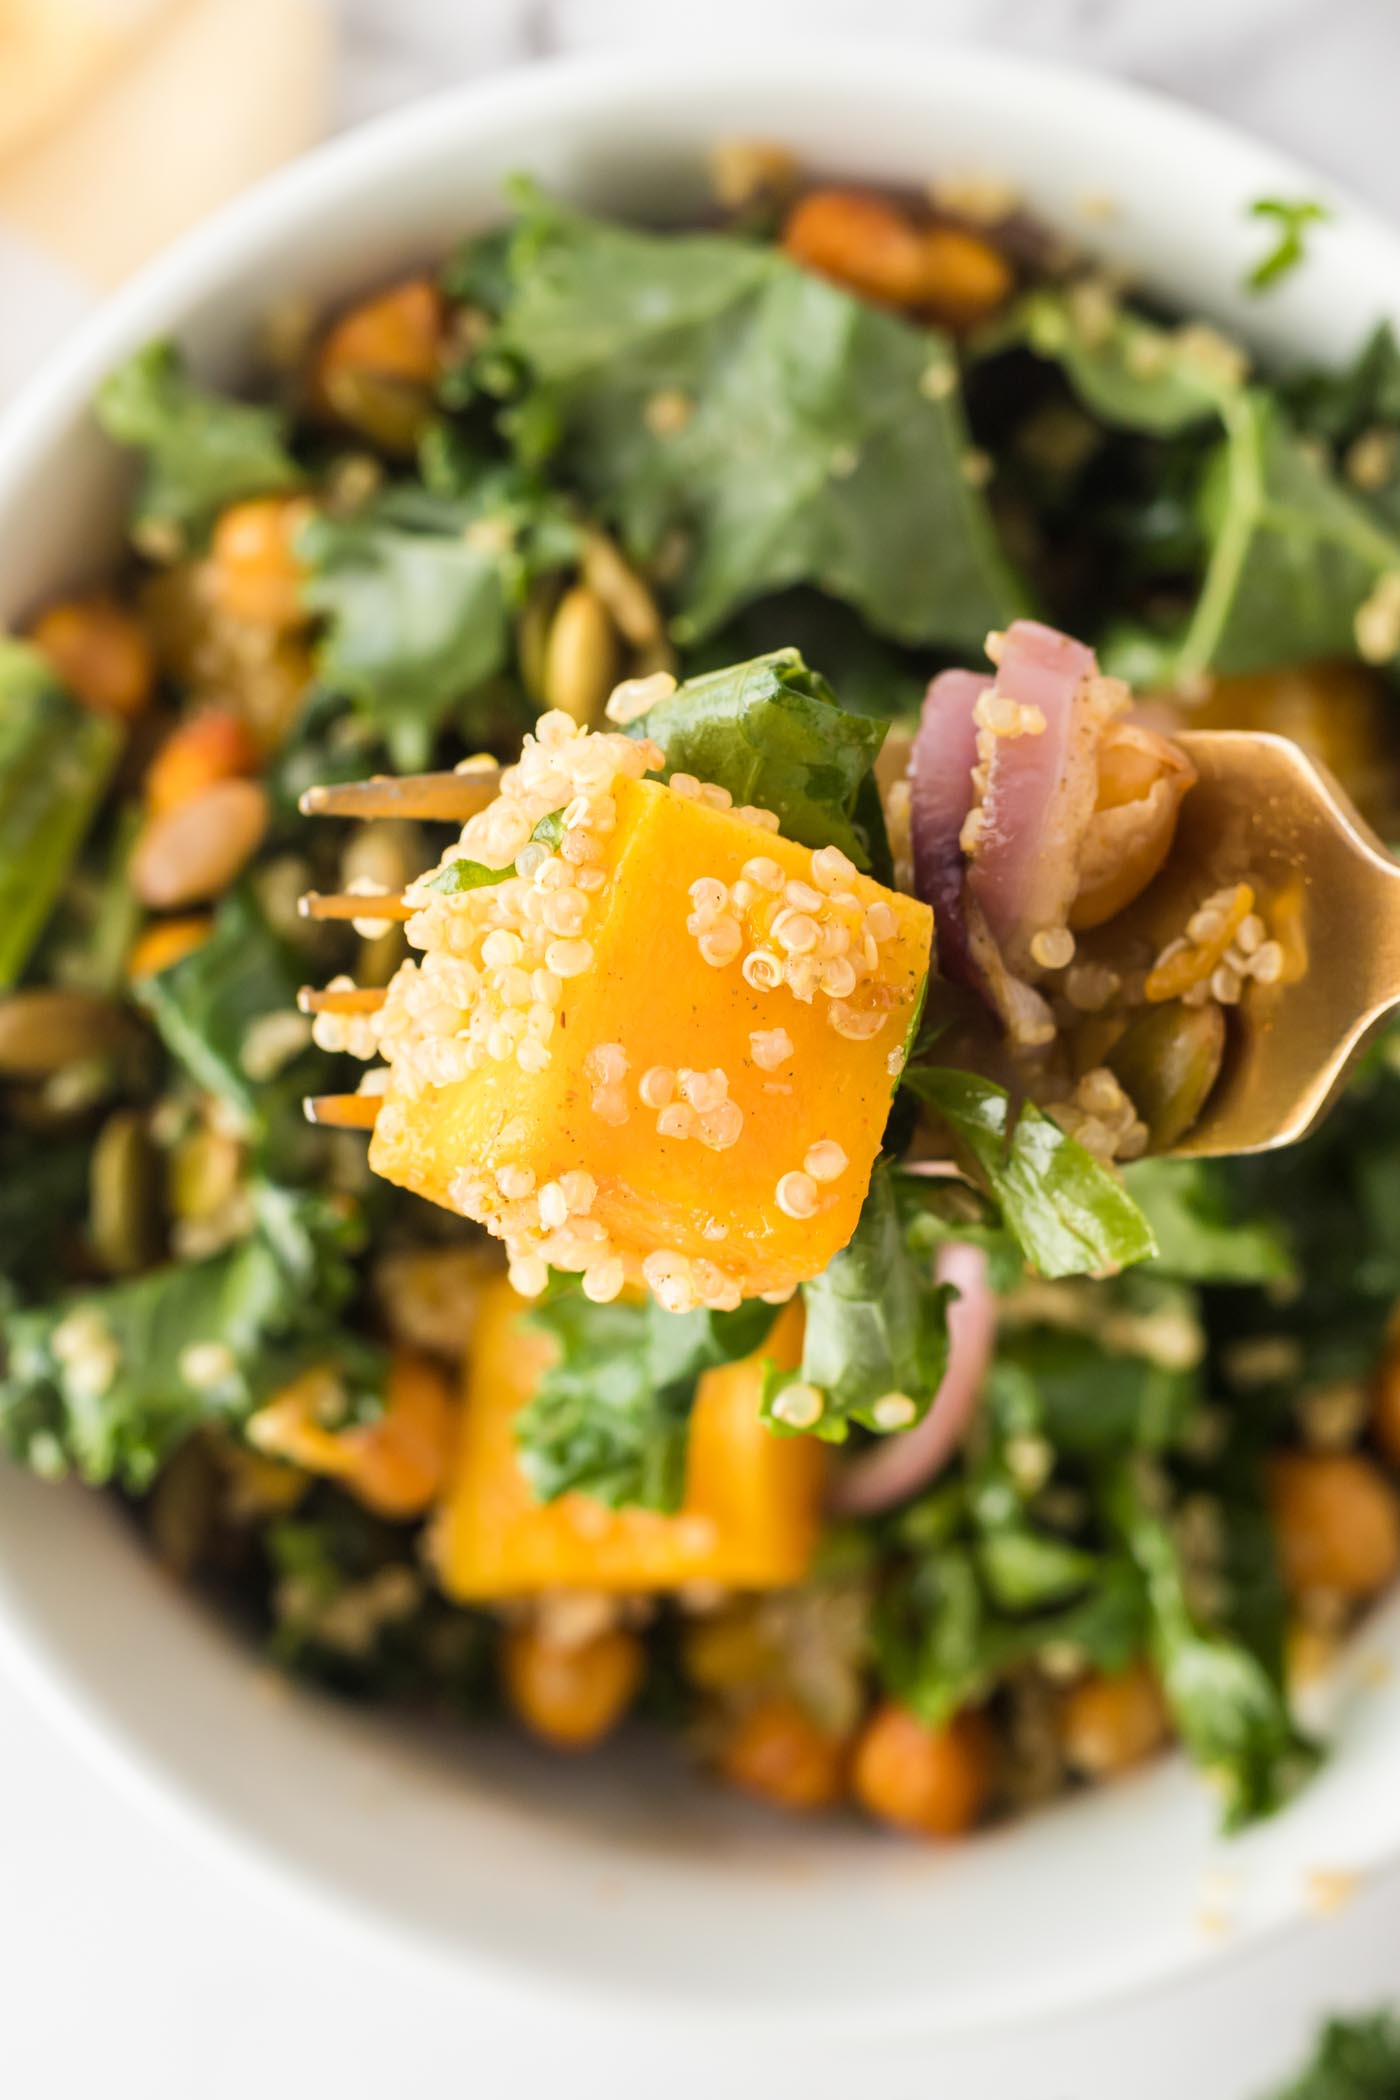 A cube of roasted butternut squash on a fork with some kale, red onion and quinoa.